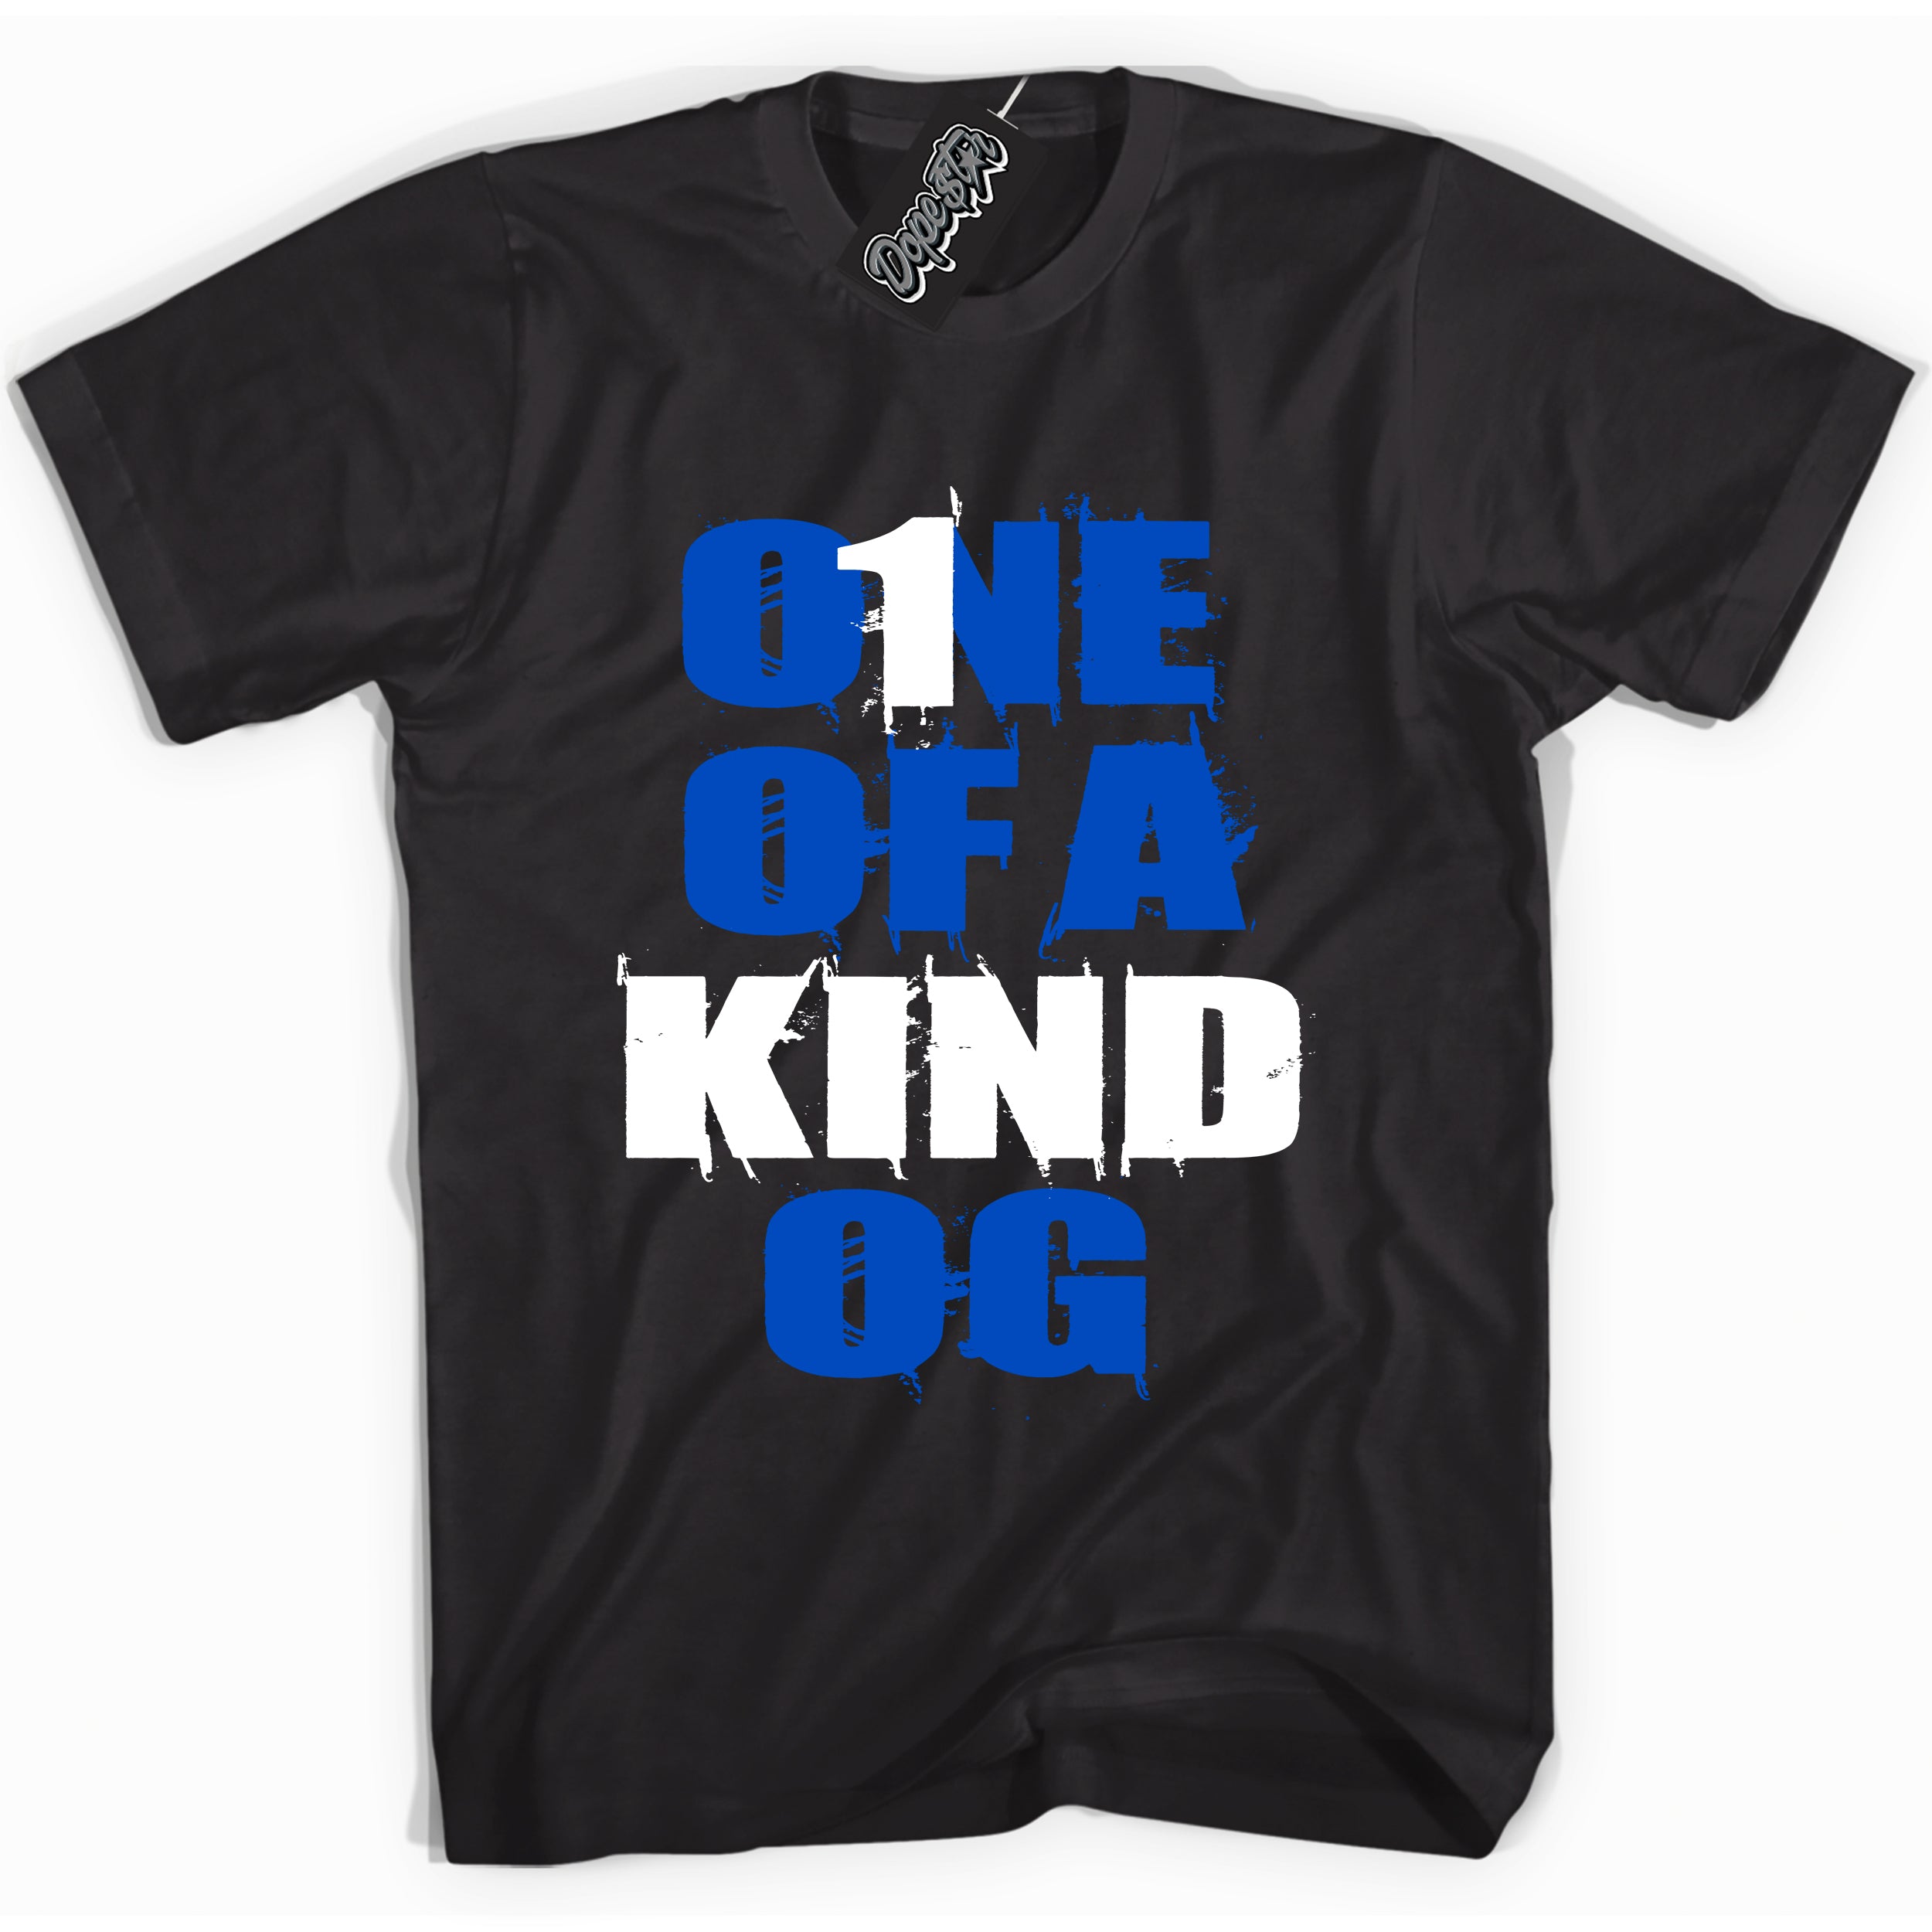 Cool Black graphic tee with “ One Of A Kind OG ” design, that perfectly matches Royal Reimagined 1s sneakers 